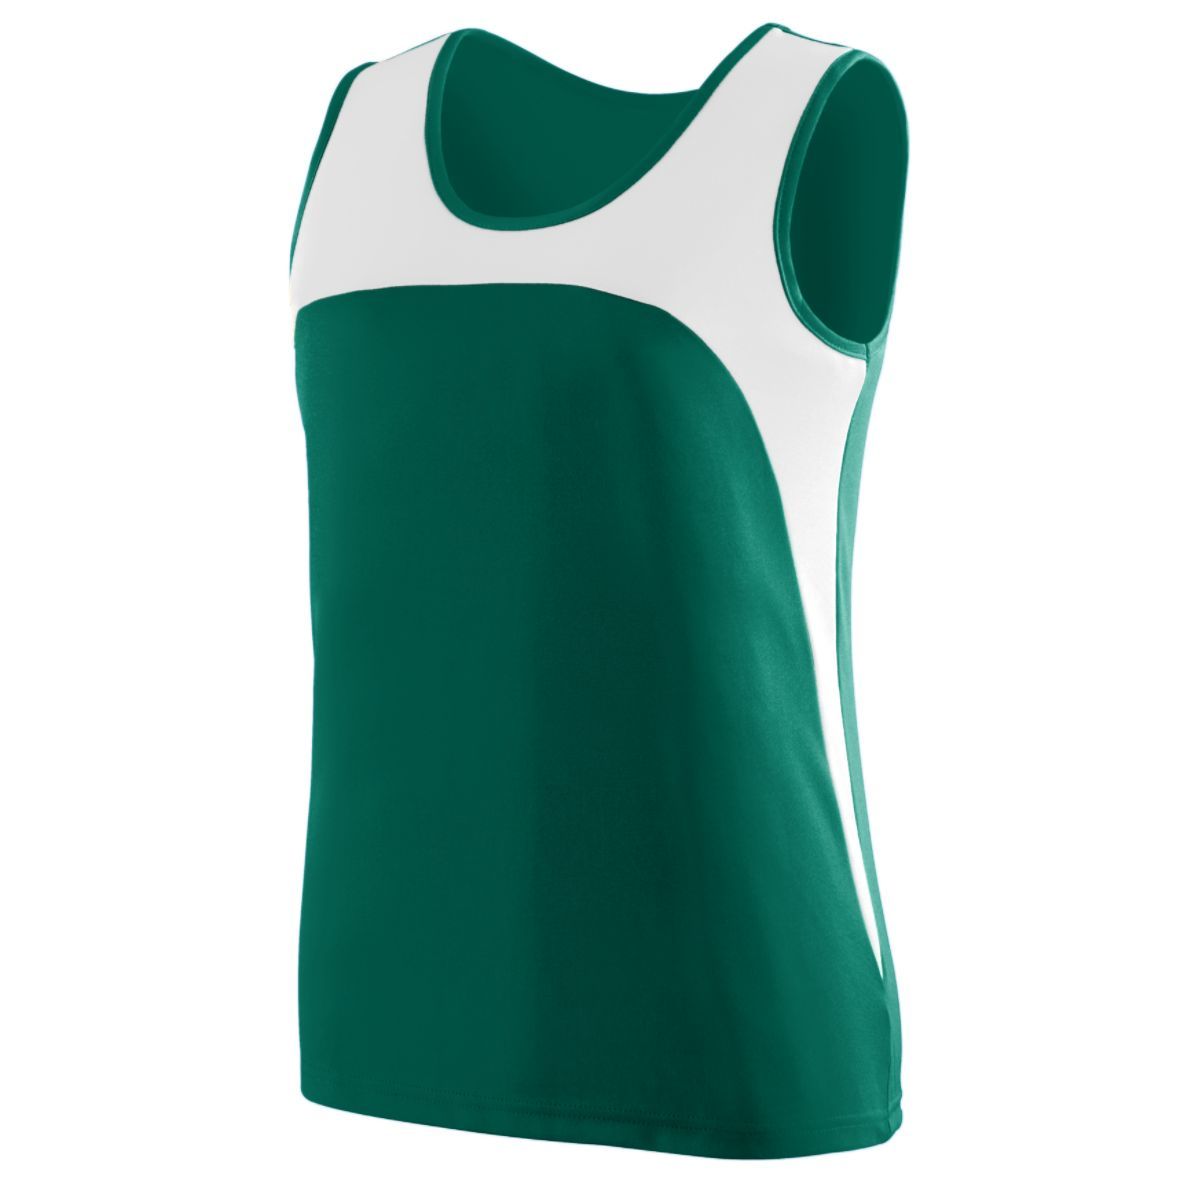 Augusta Sportswear Ladies Rapidpace Track Jersey in Dark Green/White  -Part of the Ladies, Ladies-Jersey, Augusta-Products, Track-Field, Shirts product lines at KanaleyCreations.com